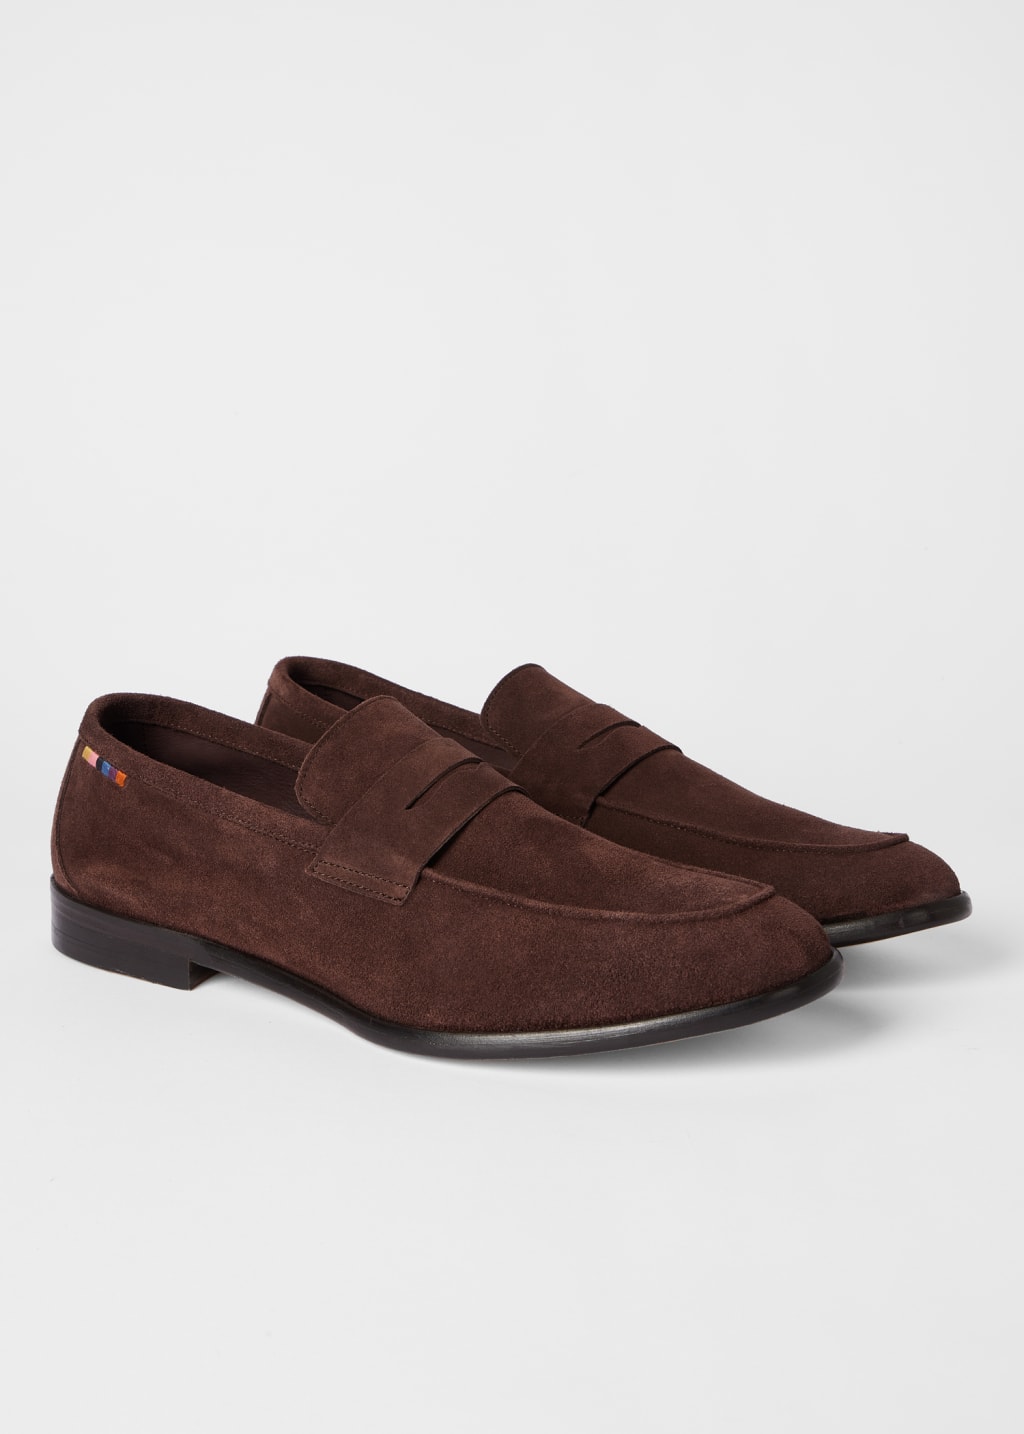 Pair View - Dark Brown Suede 'Figaro' Loafers Paul Smith